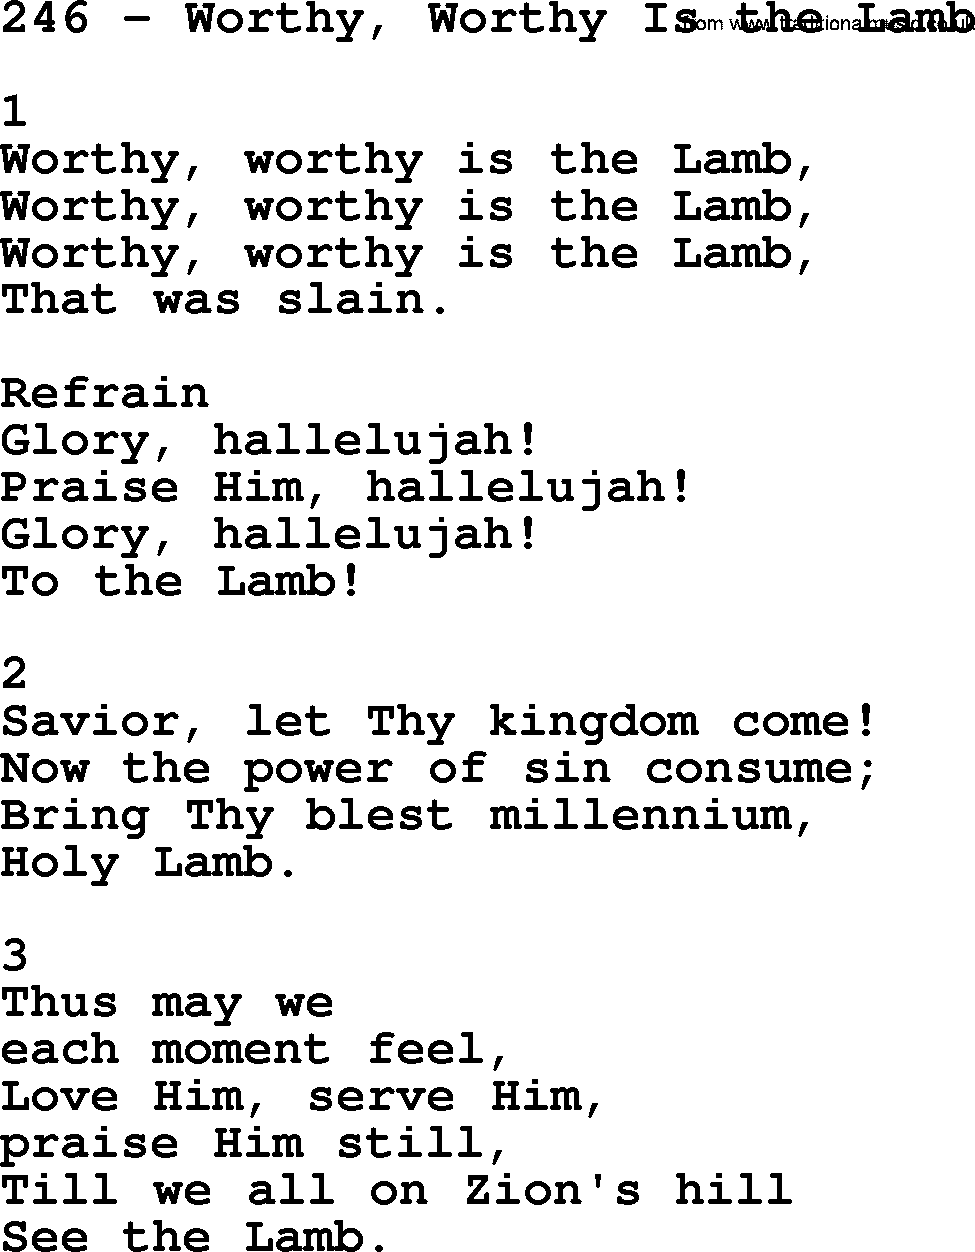 Complete Adventis Hymnal, title: 246-Worthy, Worthy Is The Lamb, with lyrics, midi, mp3, powerpoints(PPT) and PDF,